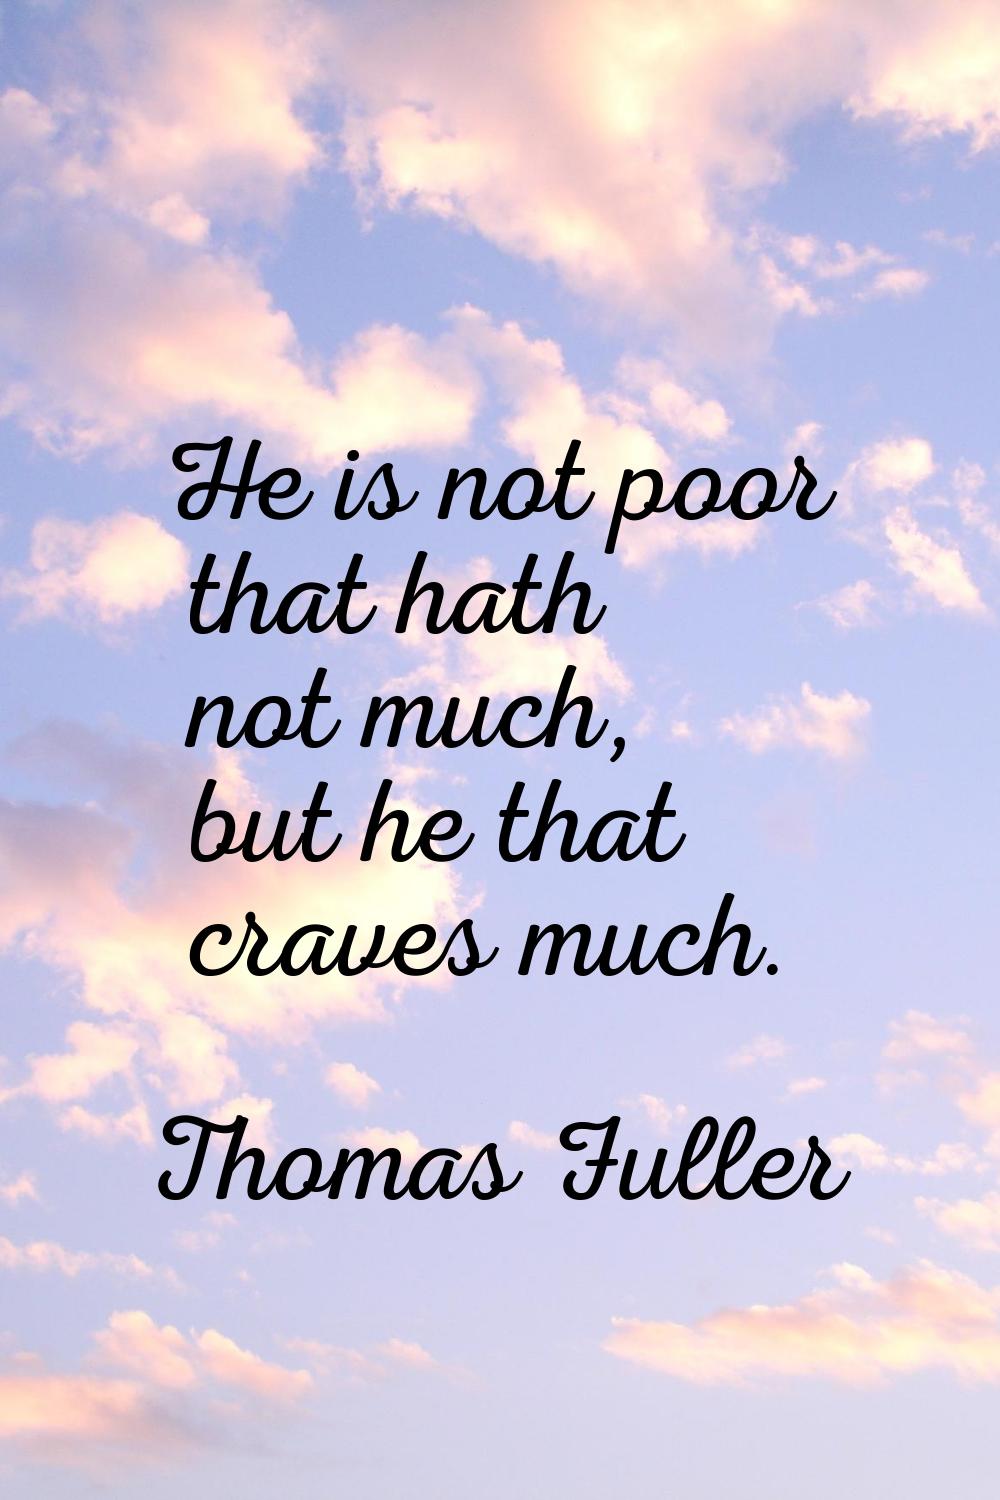 He is not poor that hath not much, but he that craves much.